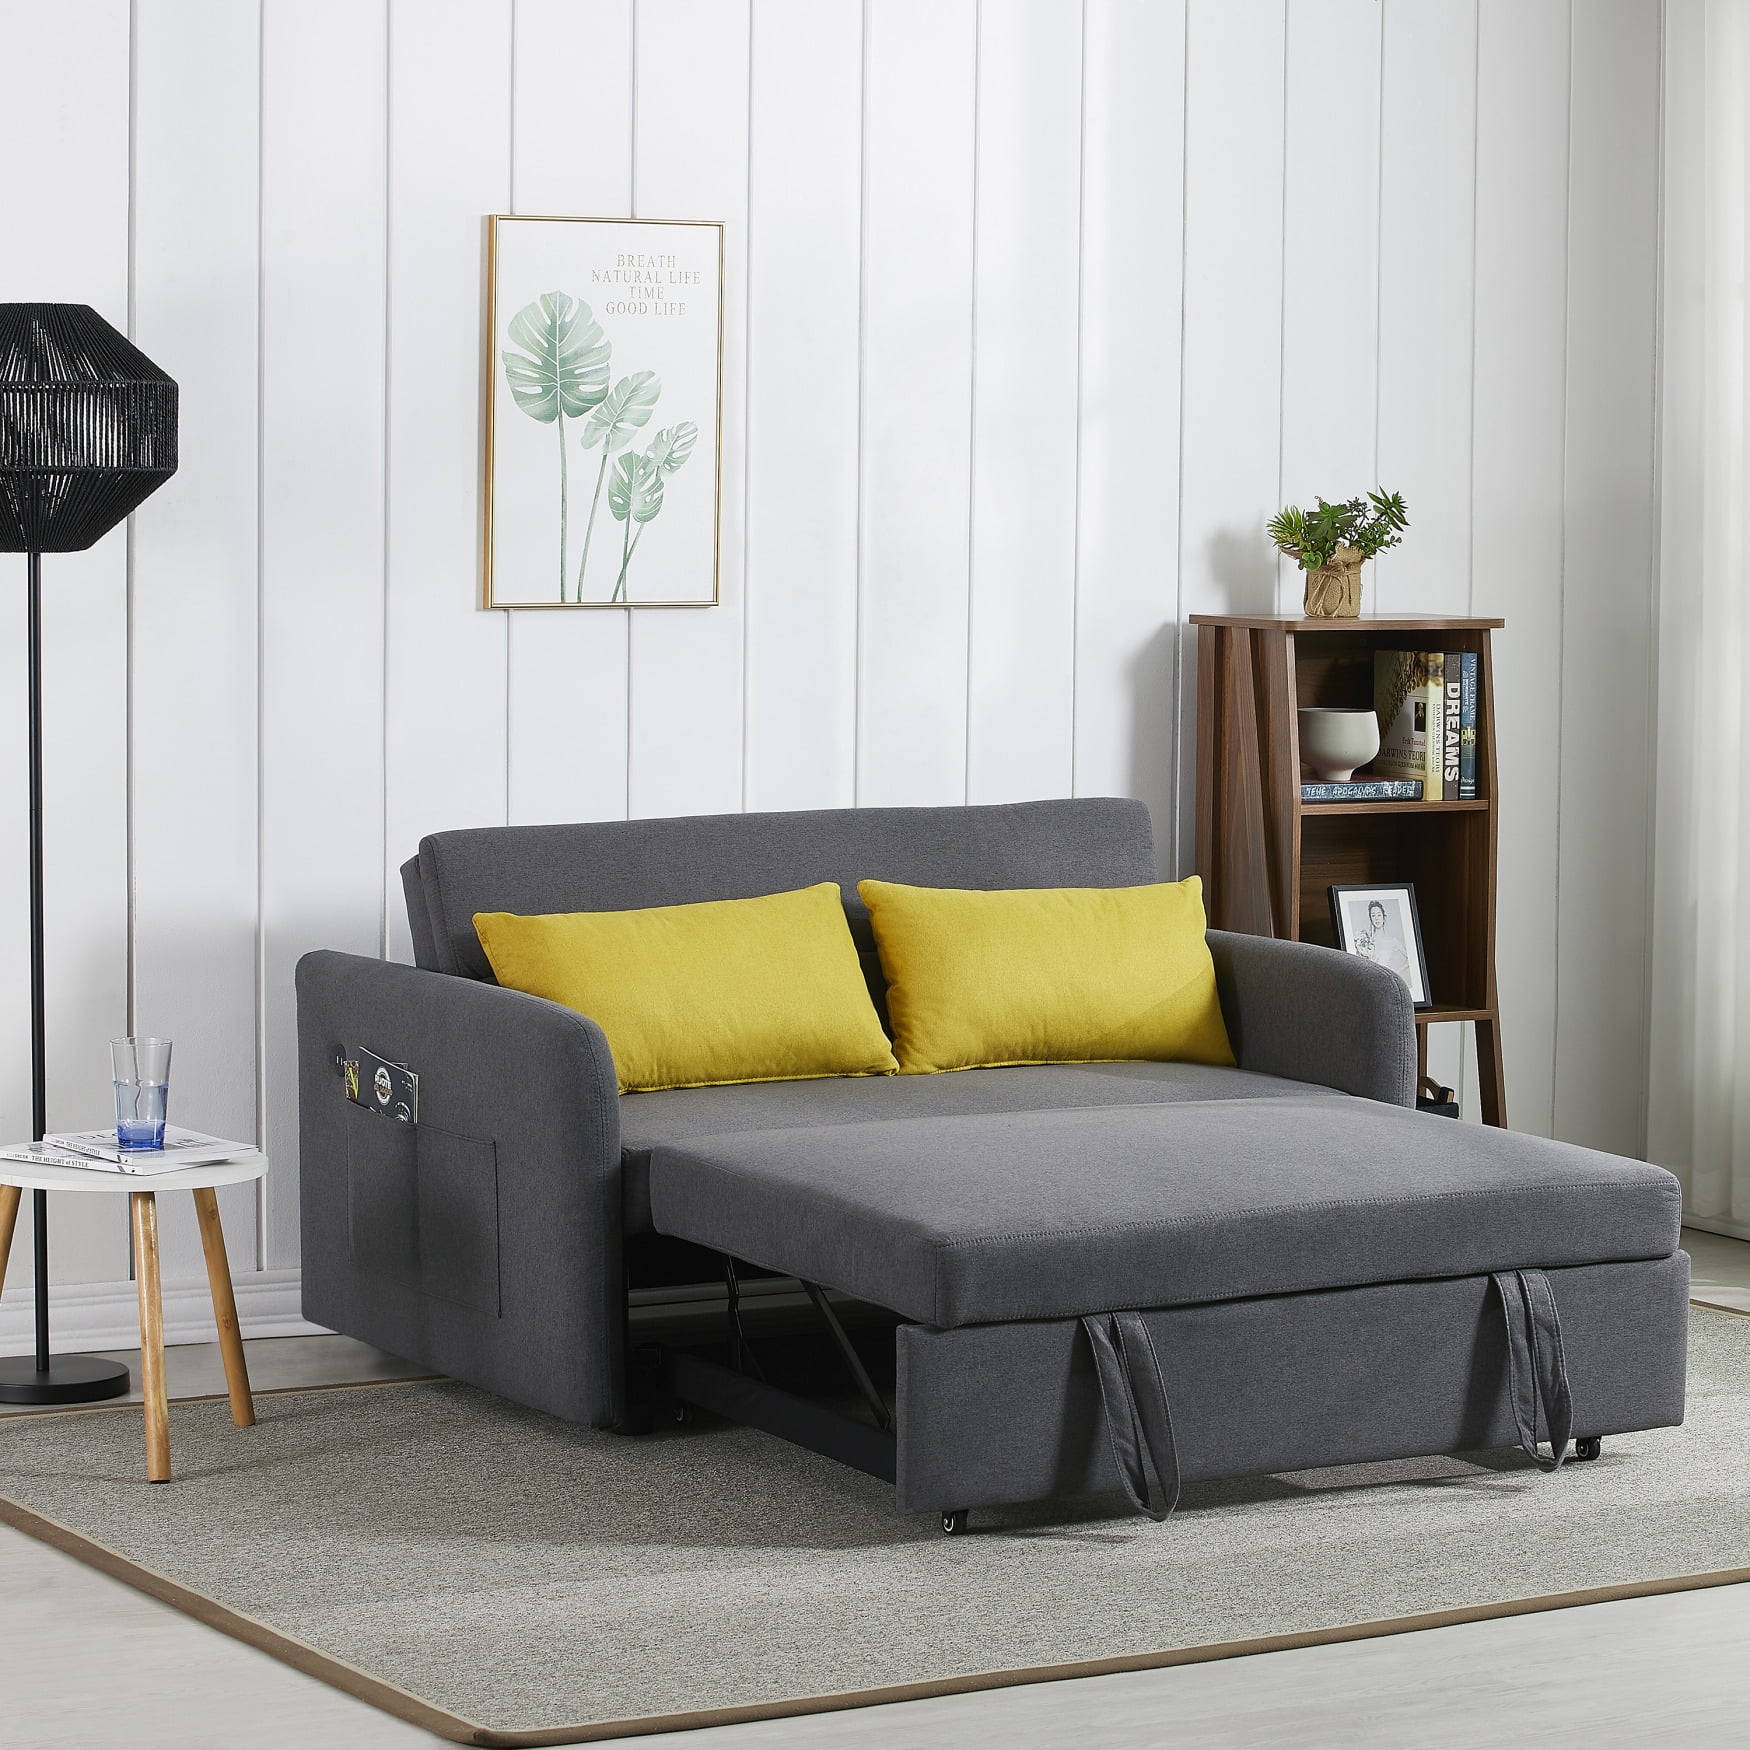 Loveseat Sofa Bed,3-in-1 Convertible Sleeper Chair Pull Out Sofa Bed ...